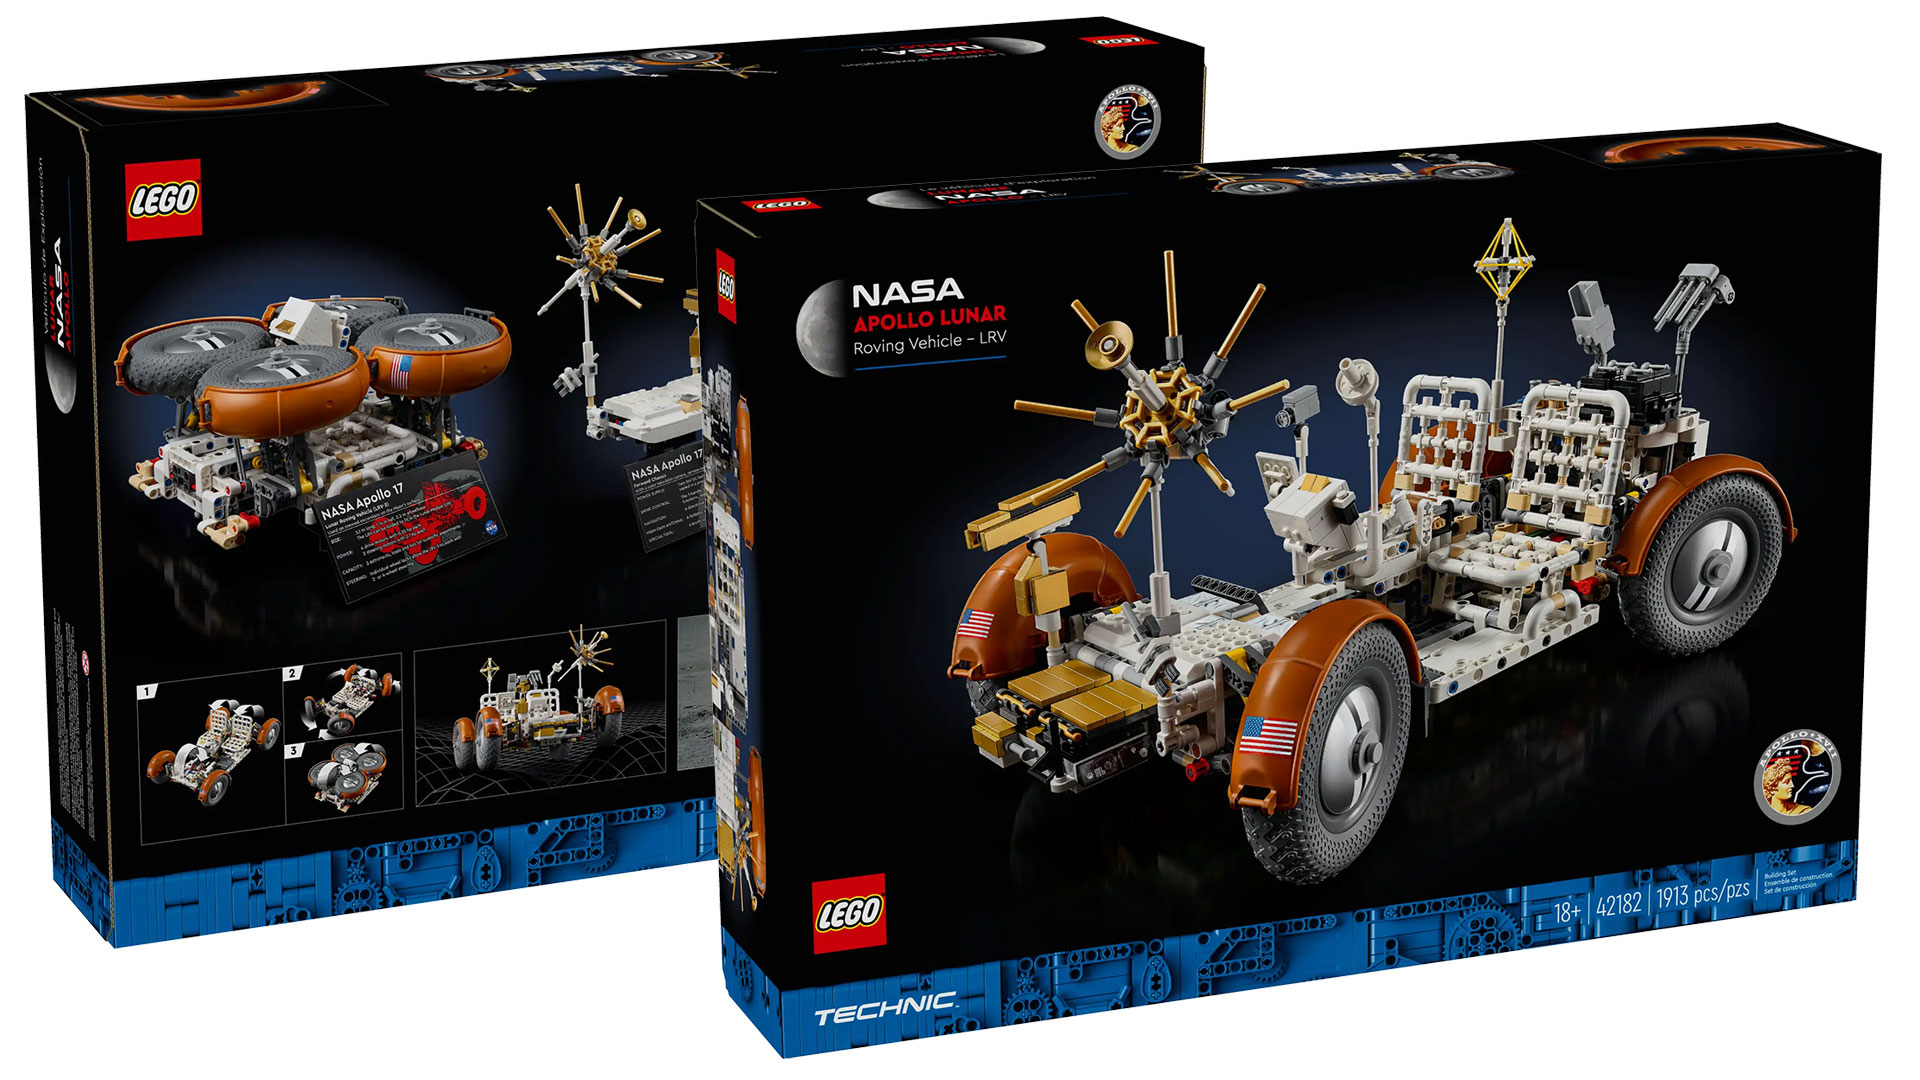 photos of the front and back of the box for a lego moon rover